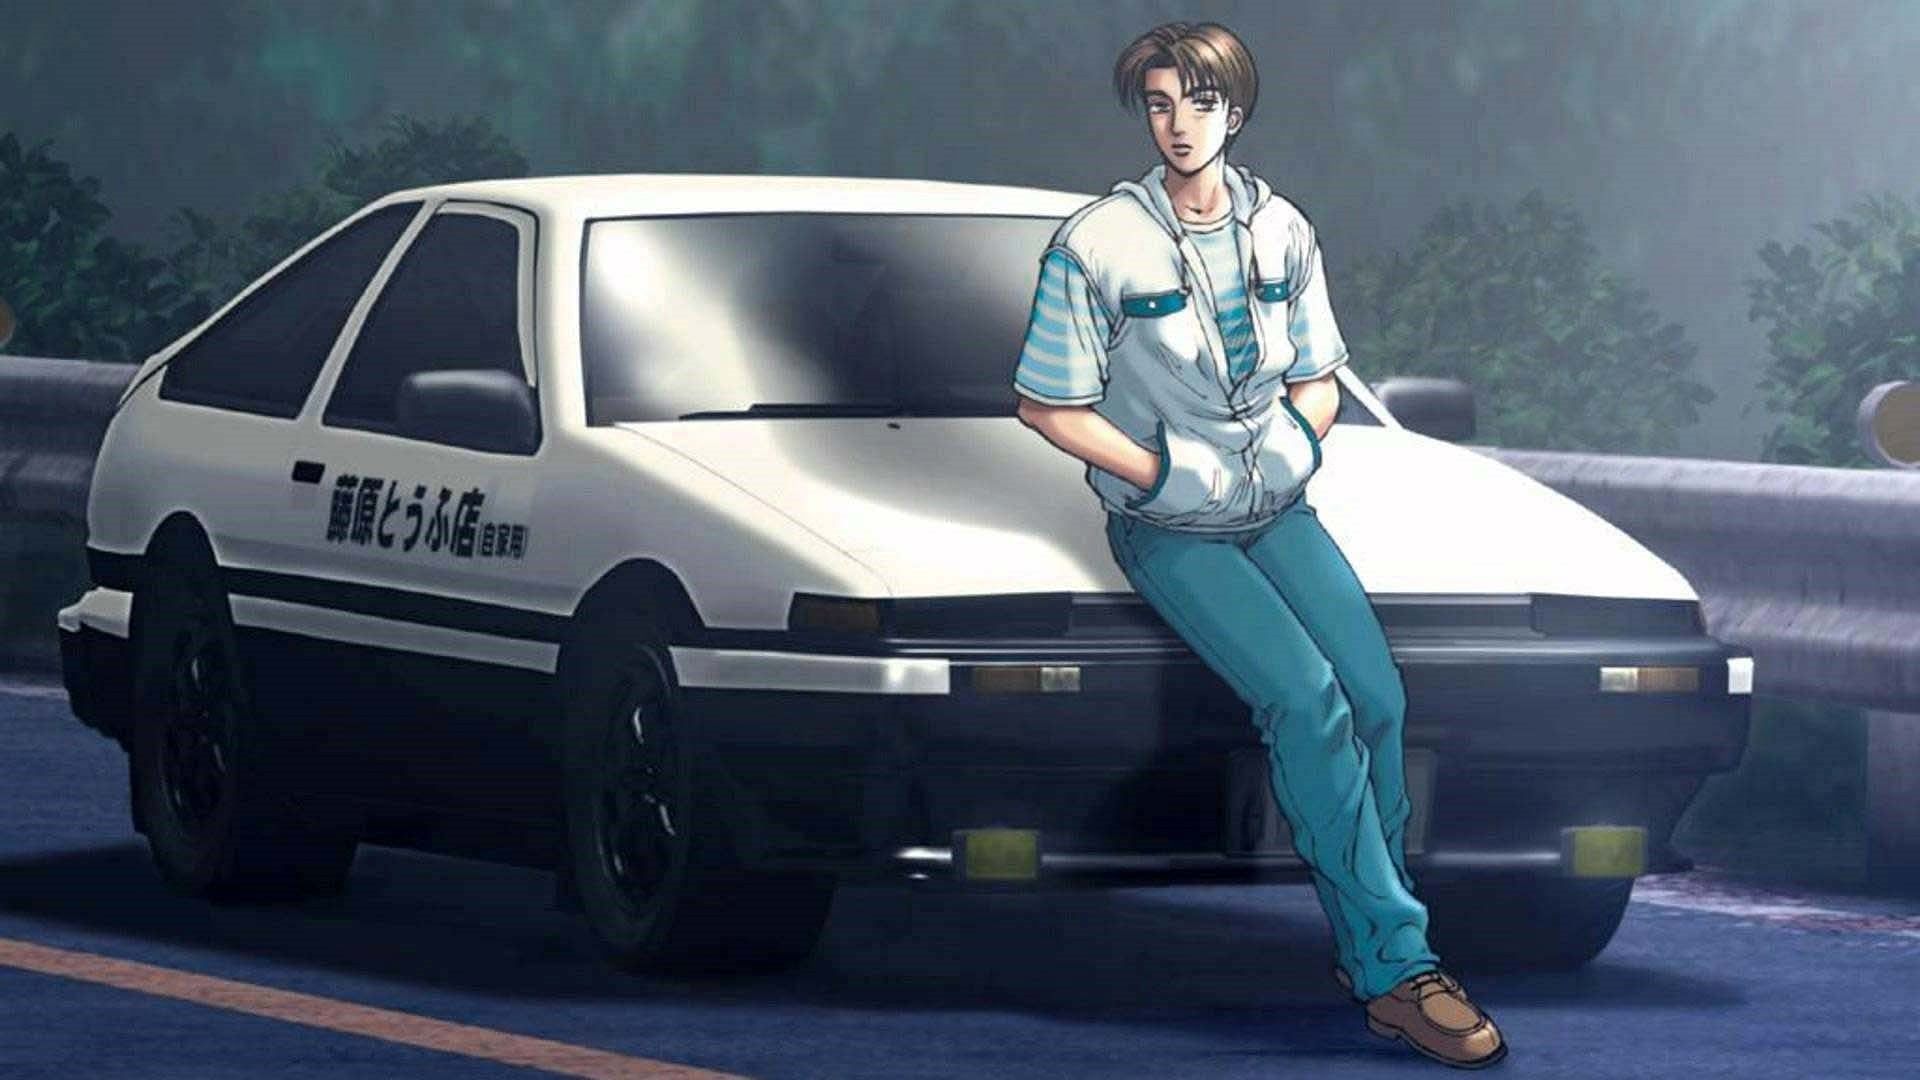 An iconic image associated with this racing anime